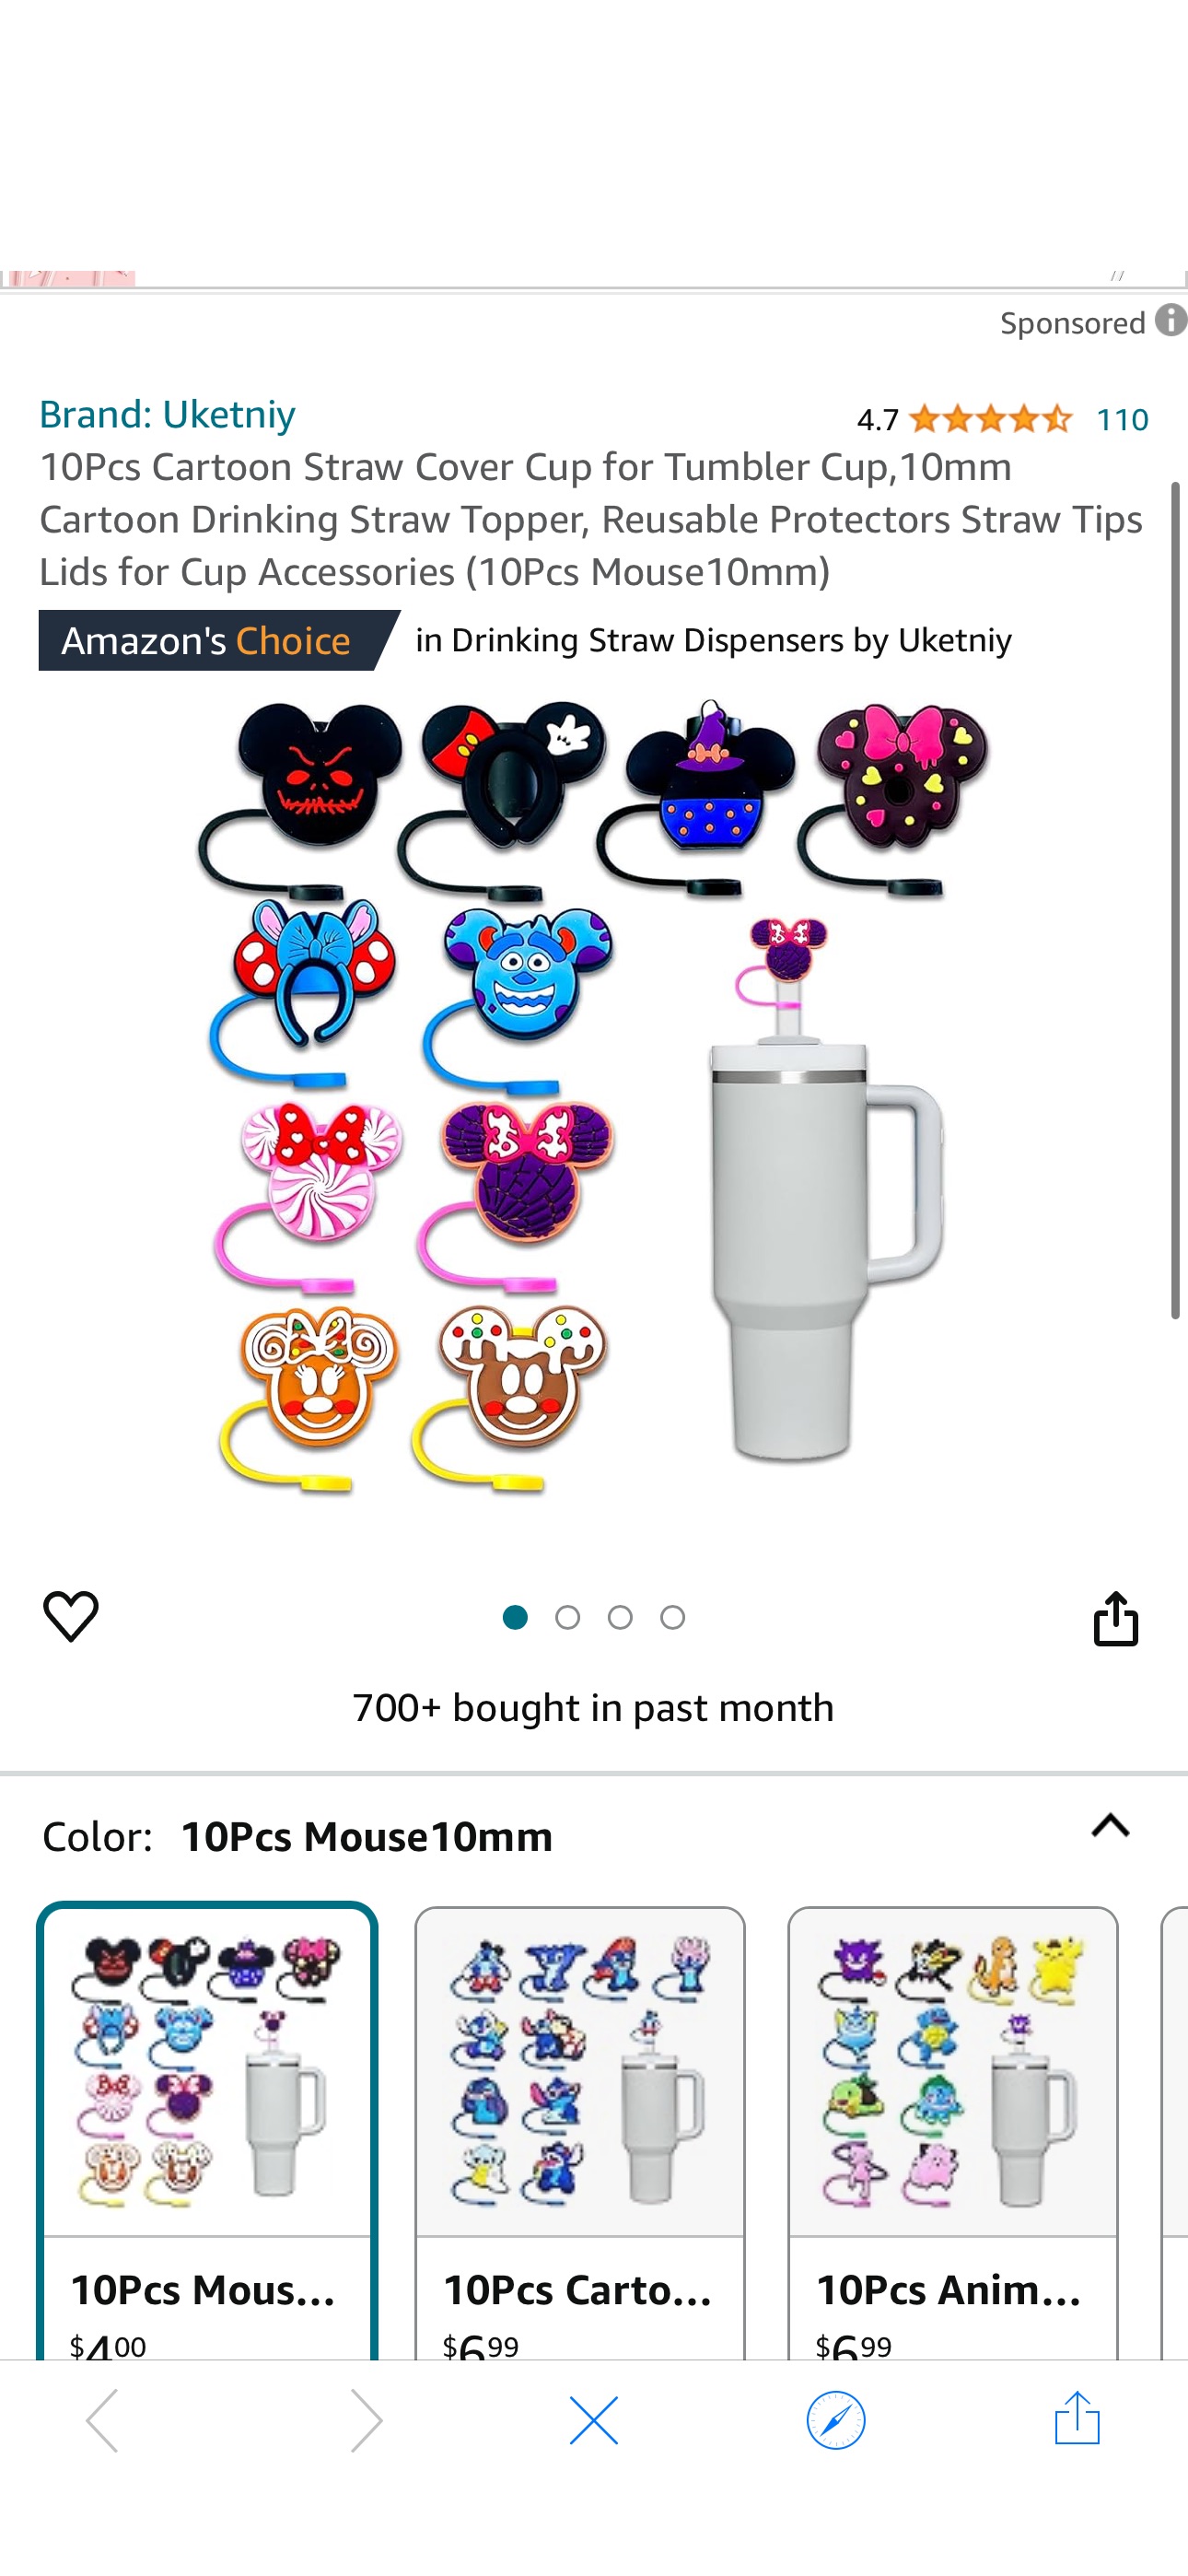 Amazon.com: 10Pcs Cartoon Straw Cover Cup for Tumbler Cup,10mm Cartoon Drinking Straw Topper, Reusable Protectors Straw Tips Lids for Cup Accessories (10Pcs Mouse10mm): Home & Kitchen